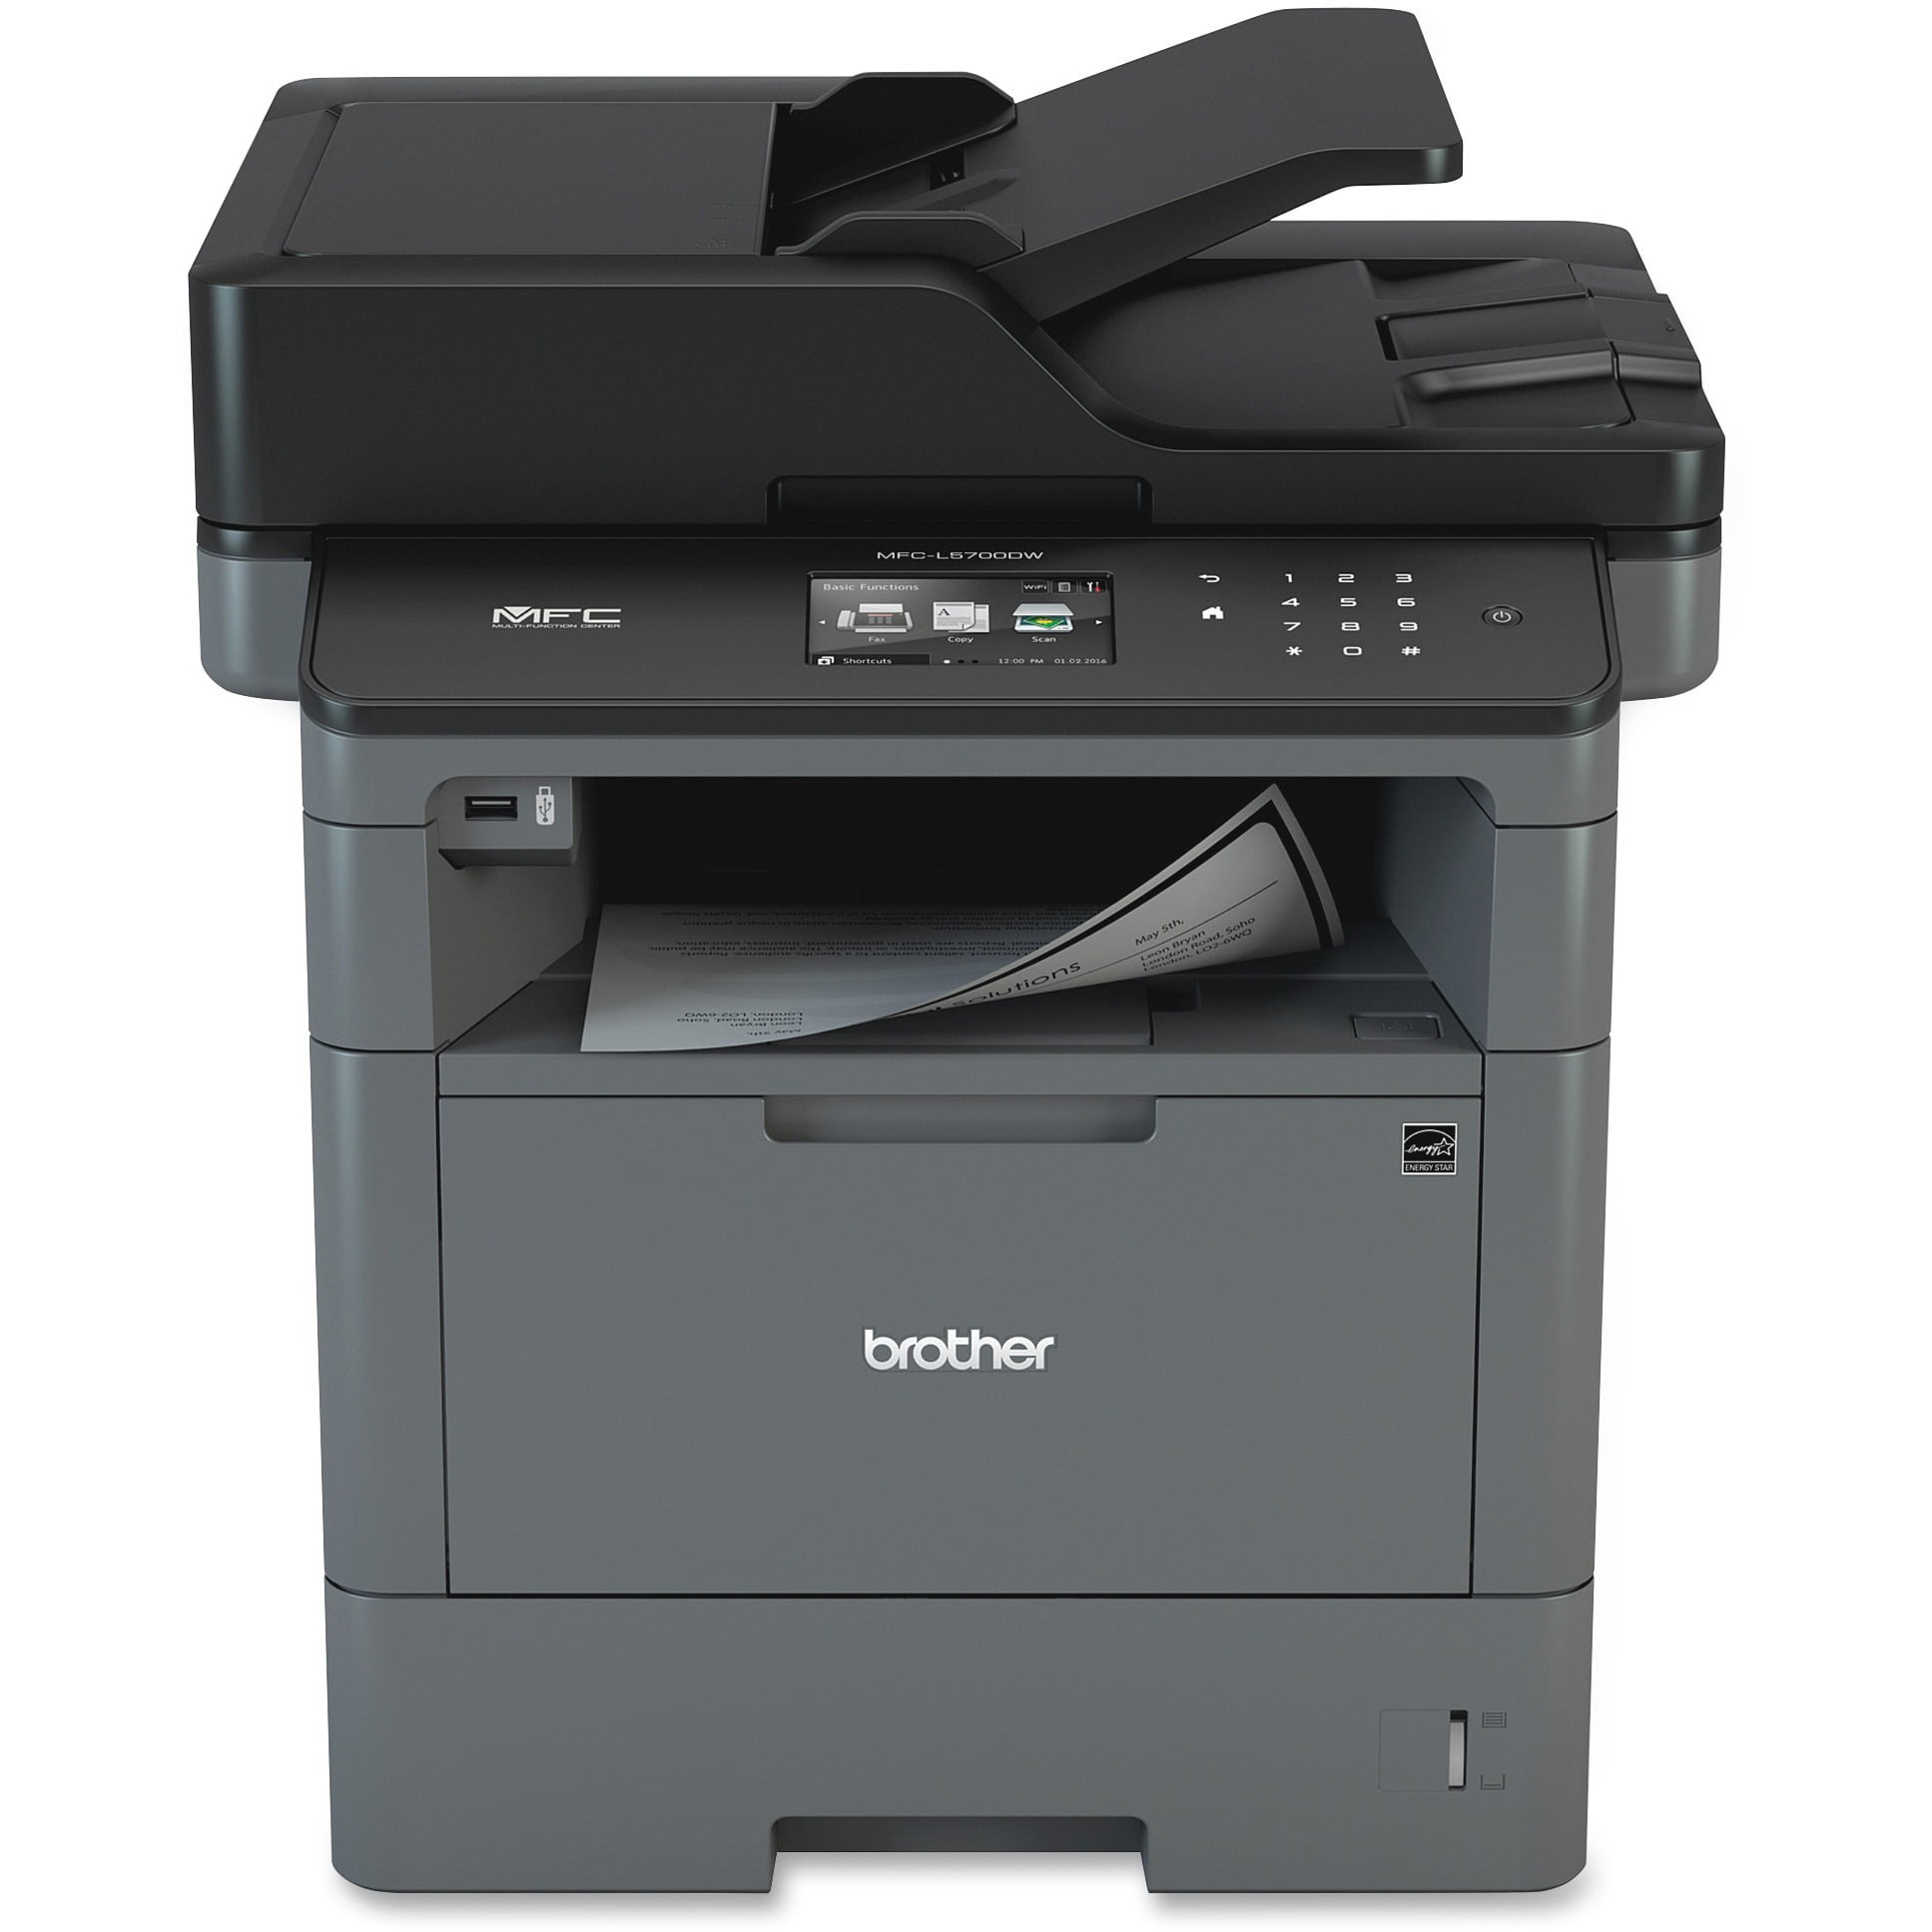 Brother Monochrome Laser Multifunction All-in-One Printer, Flexible Connectivity, Mobile Printing & Scanning, Duplex Printing - Walmart.com